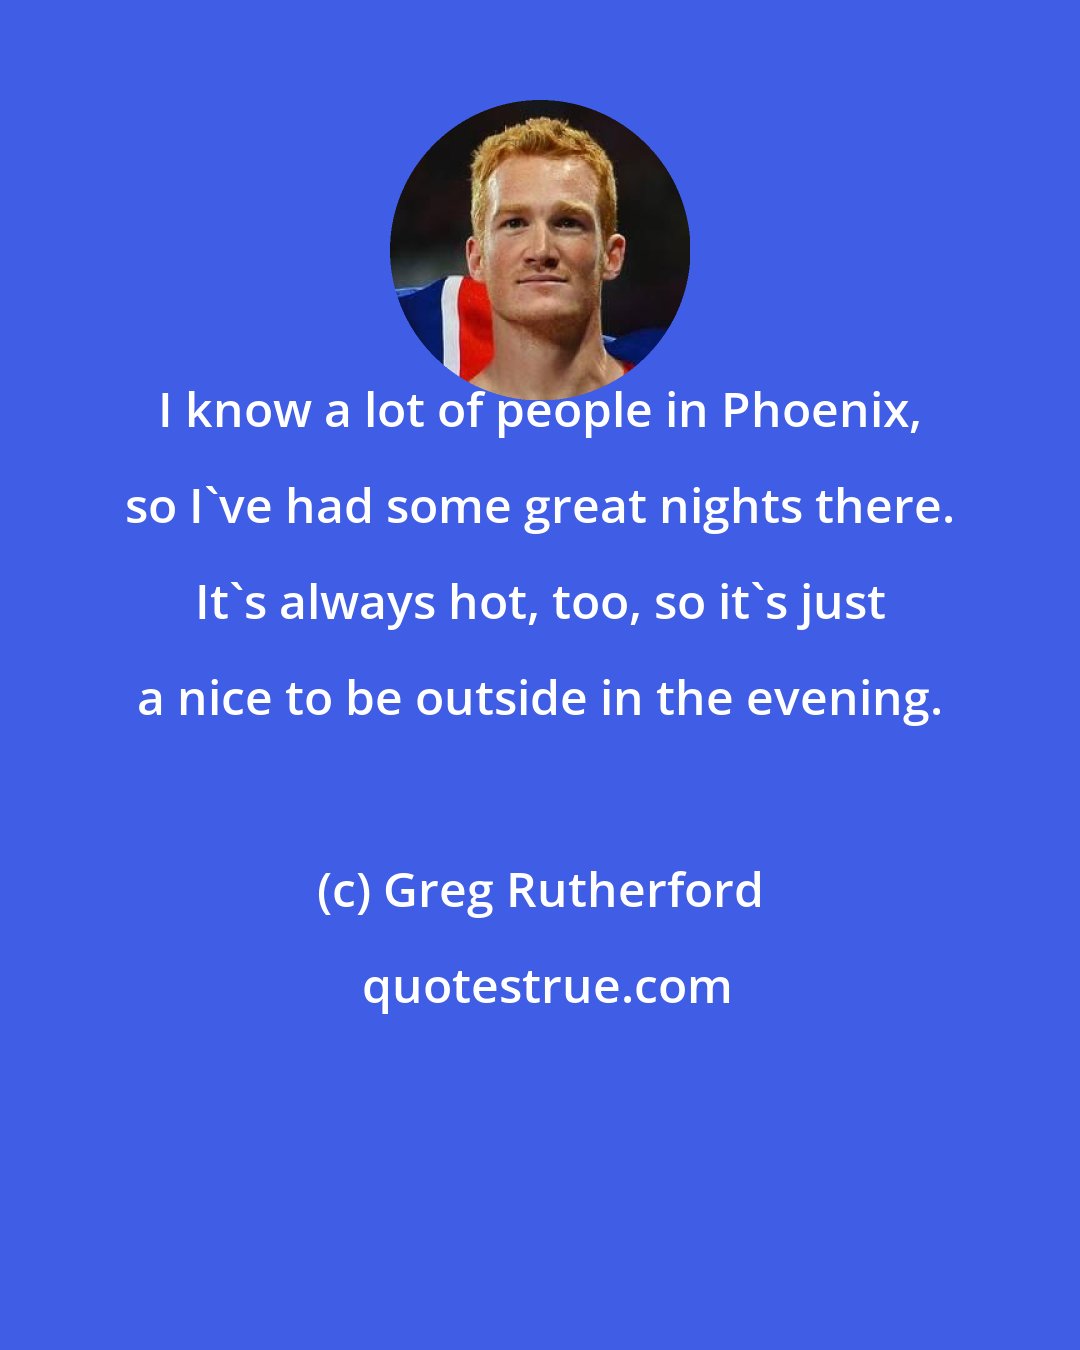 Greg Rutherford: I know a lot of people in Phoenix, so I've had some great nights there. It's always hot, too, so it's just a nice to be outside in the evening.